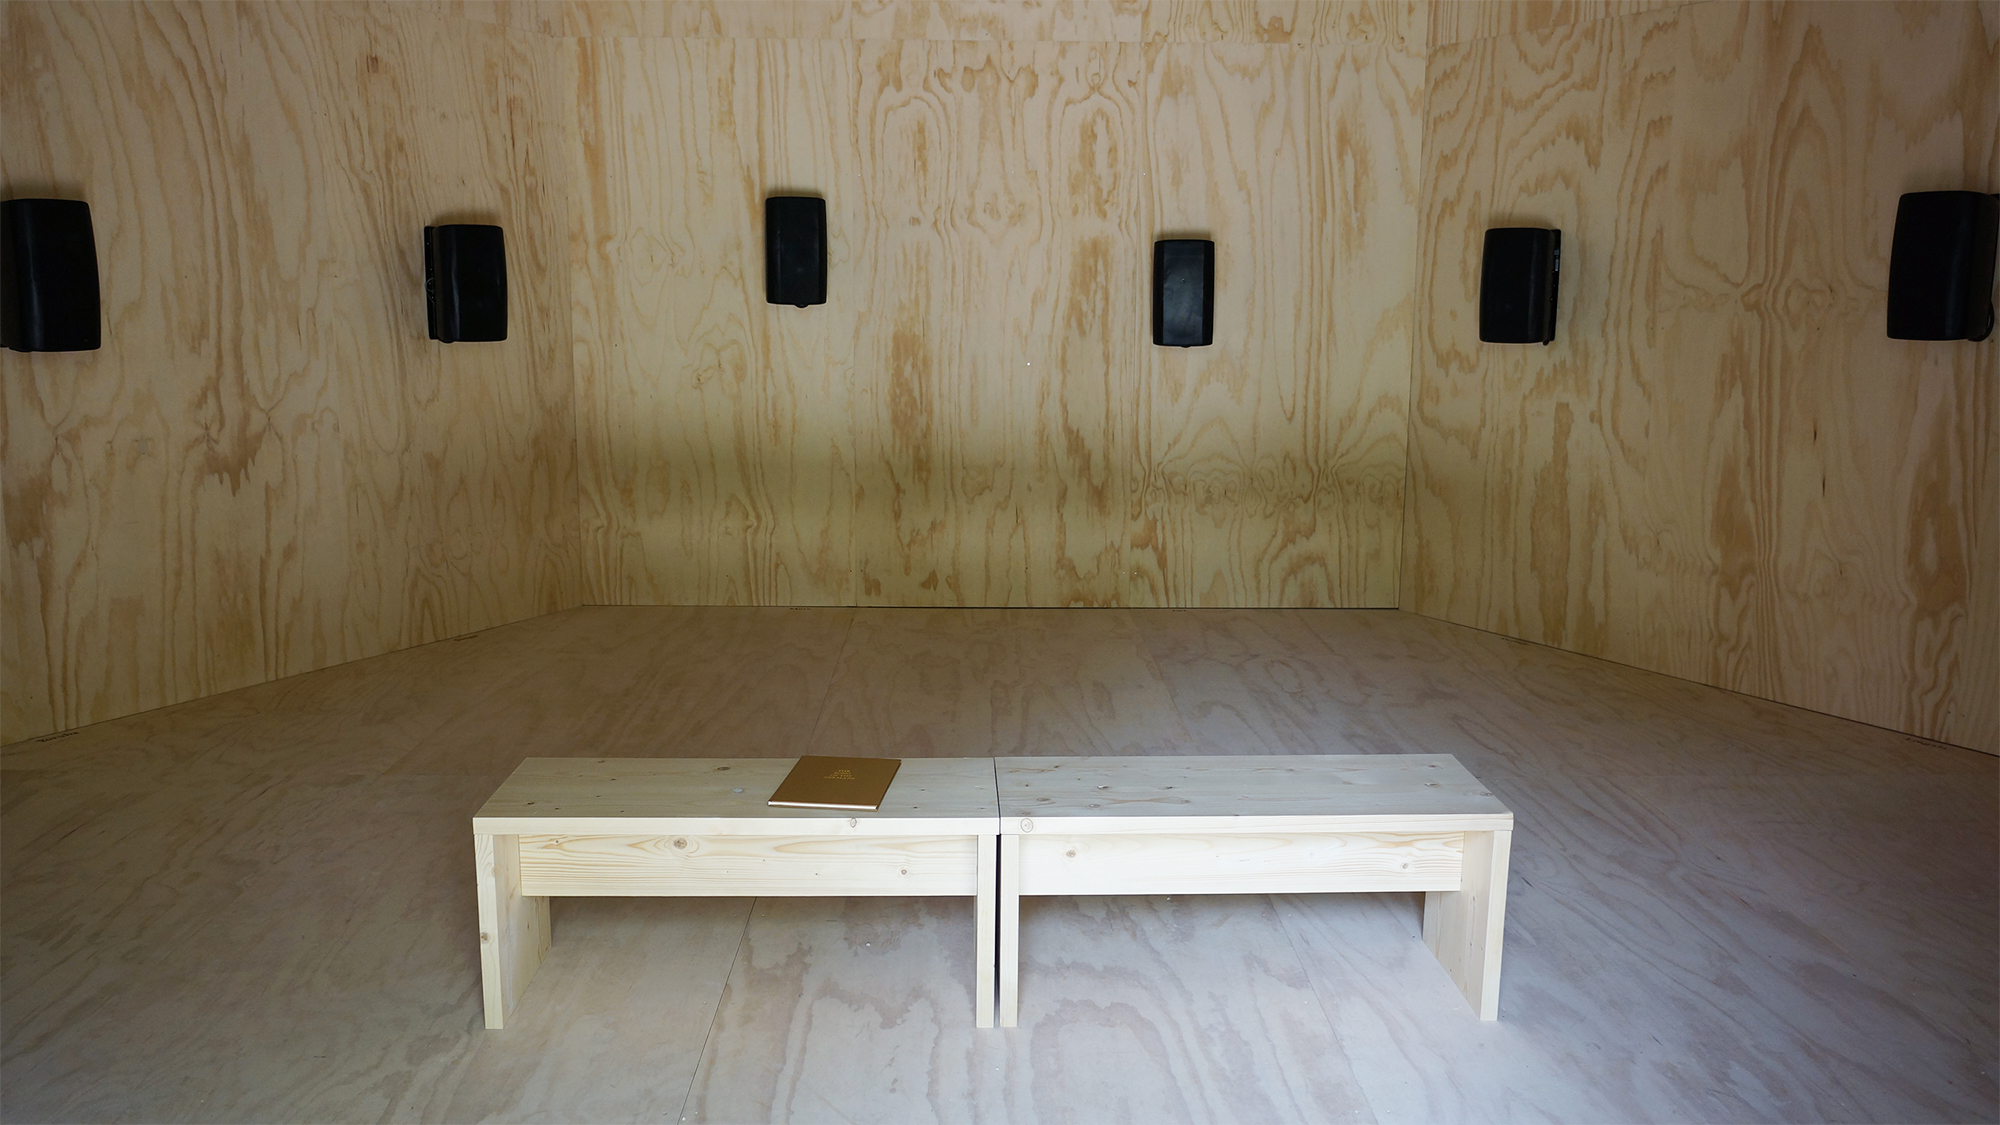 The Song of the Germans: Installation speakers and bench